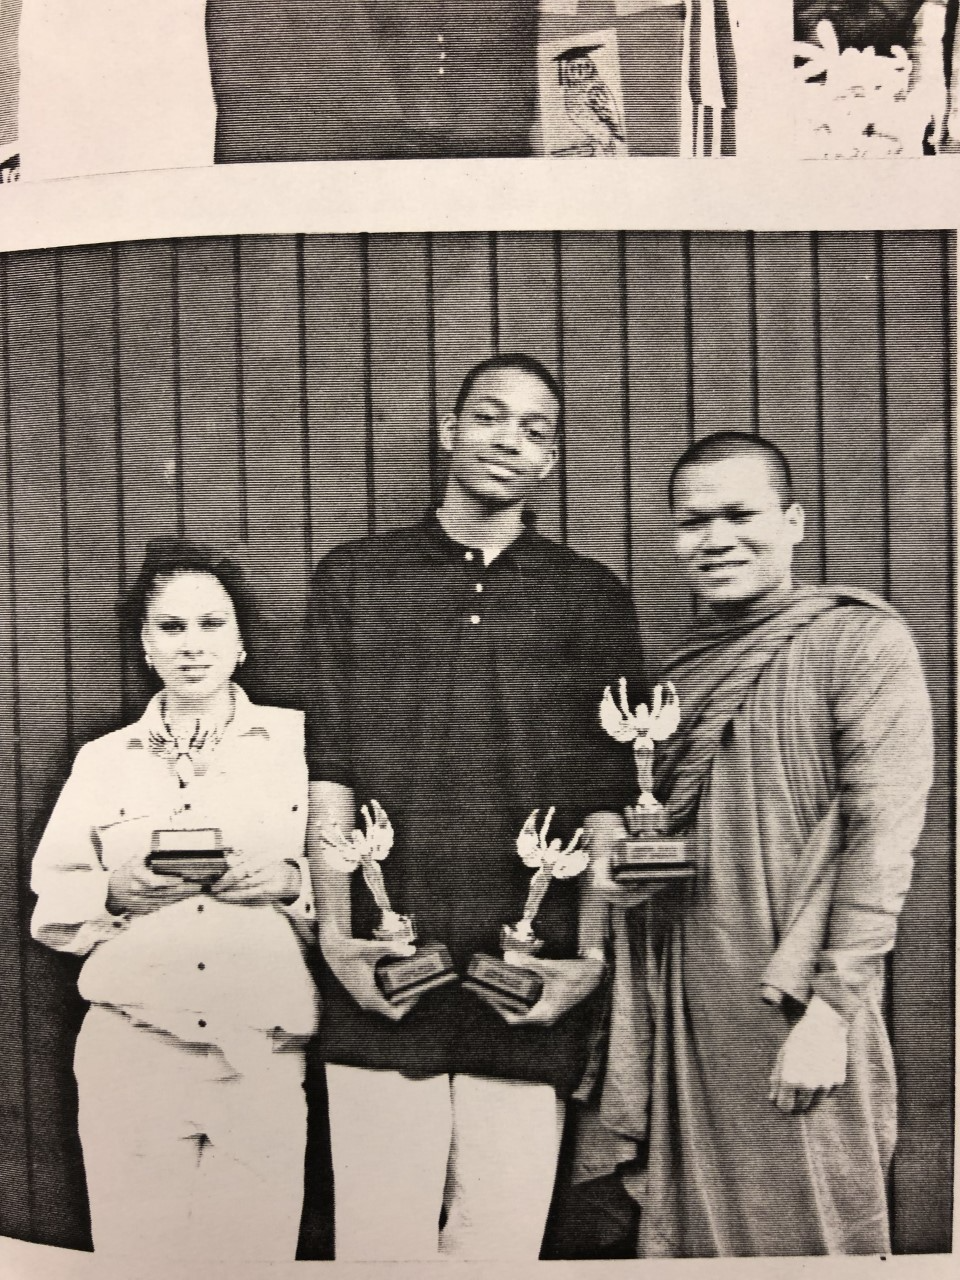 A black and white photo of three teens holding trophies. 